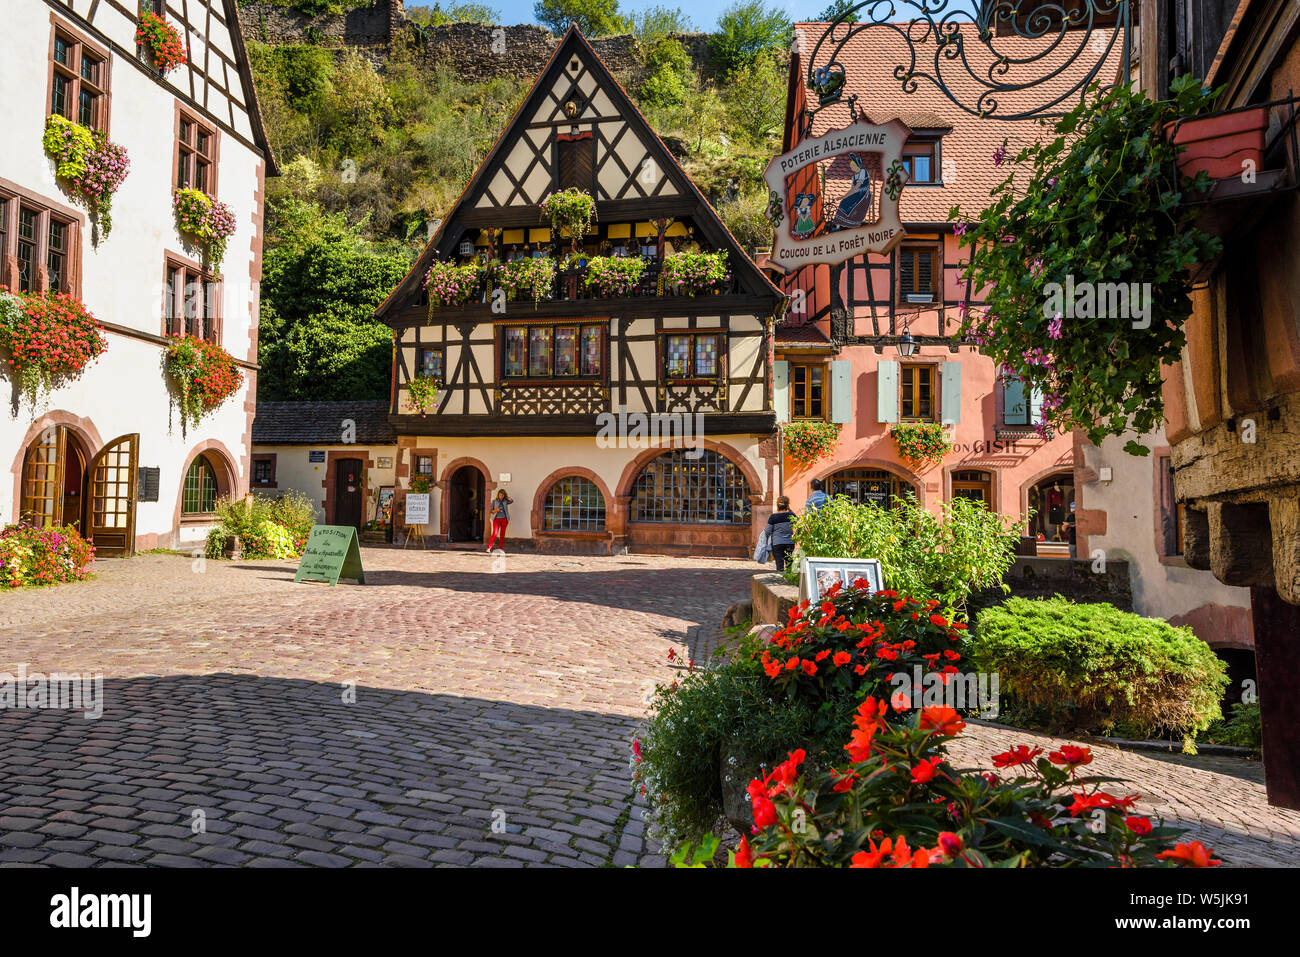 picturesque square with half-timbered houses in the old town of Kaysersberg, Alsace, Wine Route, France, touristy destination with medieval character Stock Photo